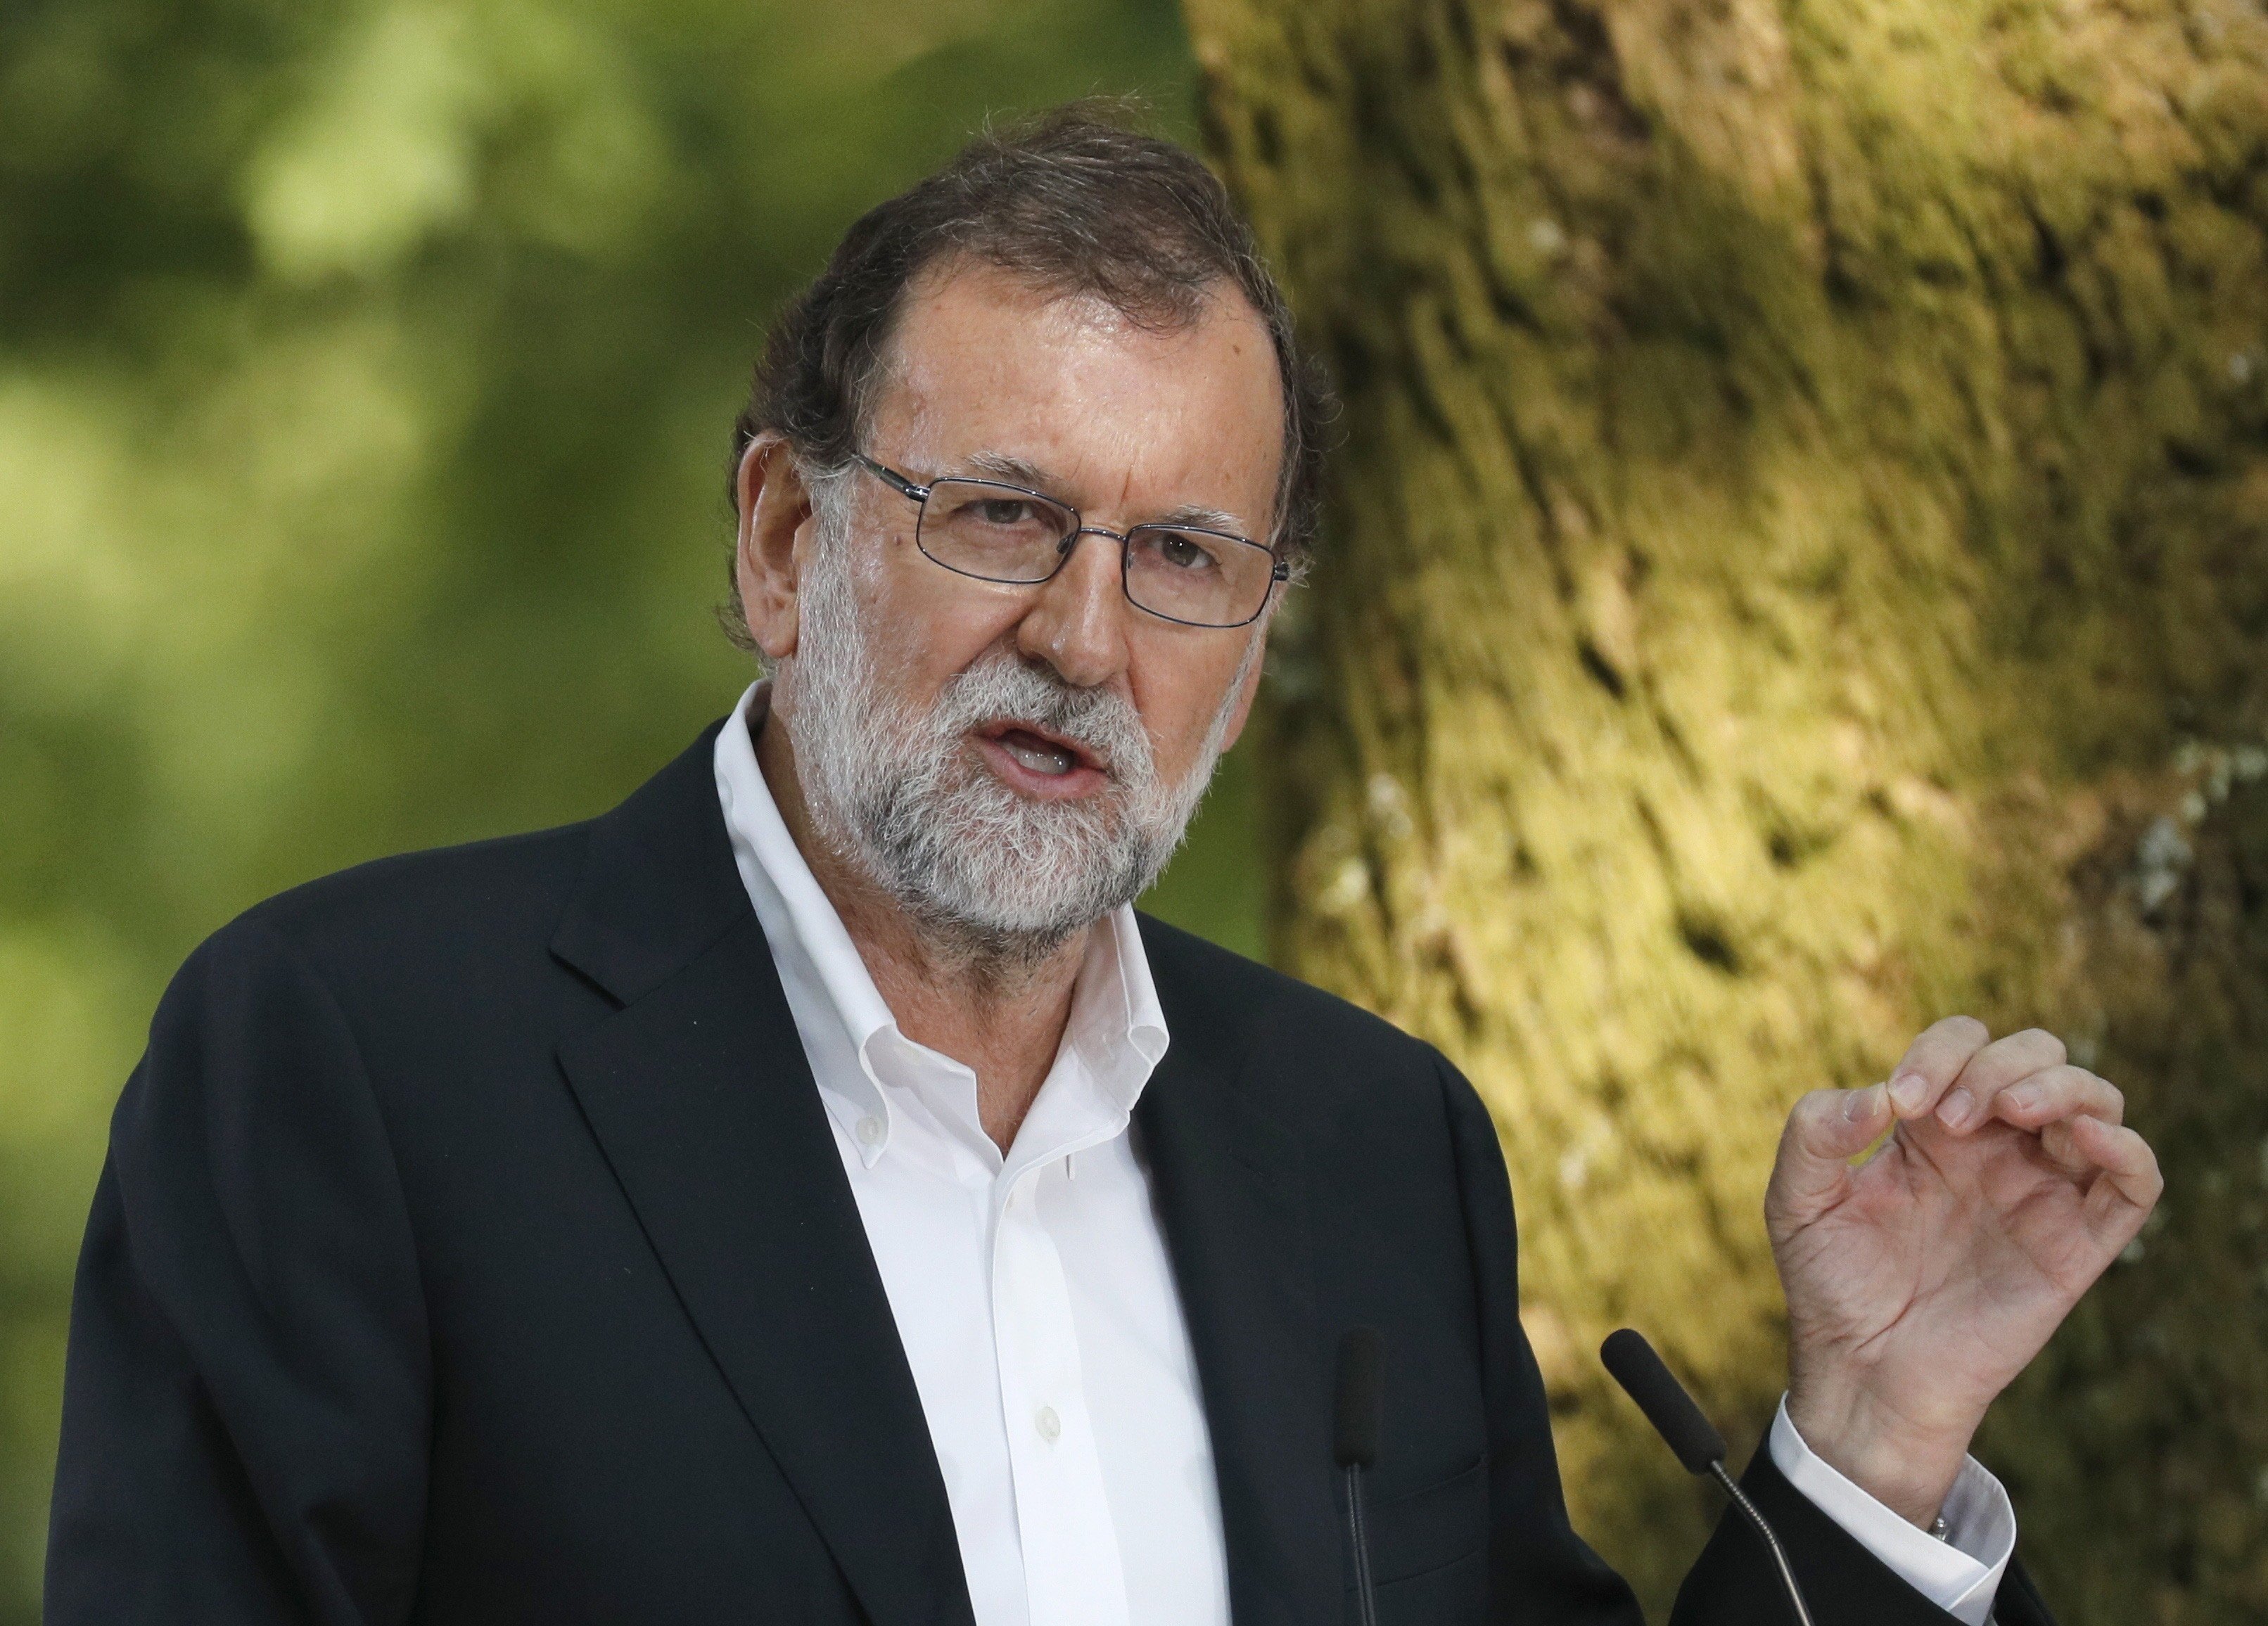 Rajoy and Sánchez to coordinate legal response to 'Law of Transitional Jurisprudence'